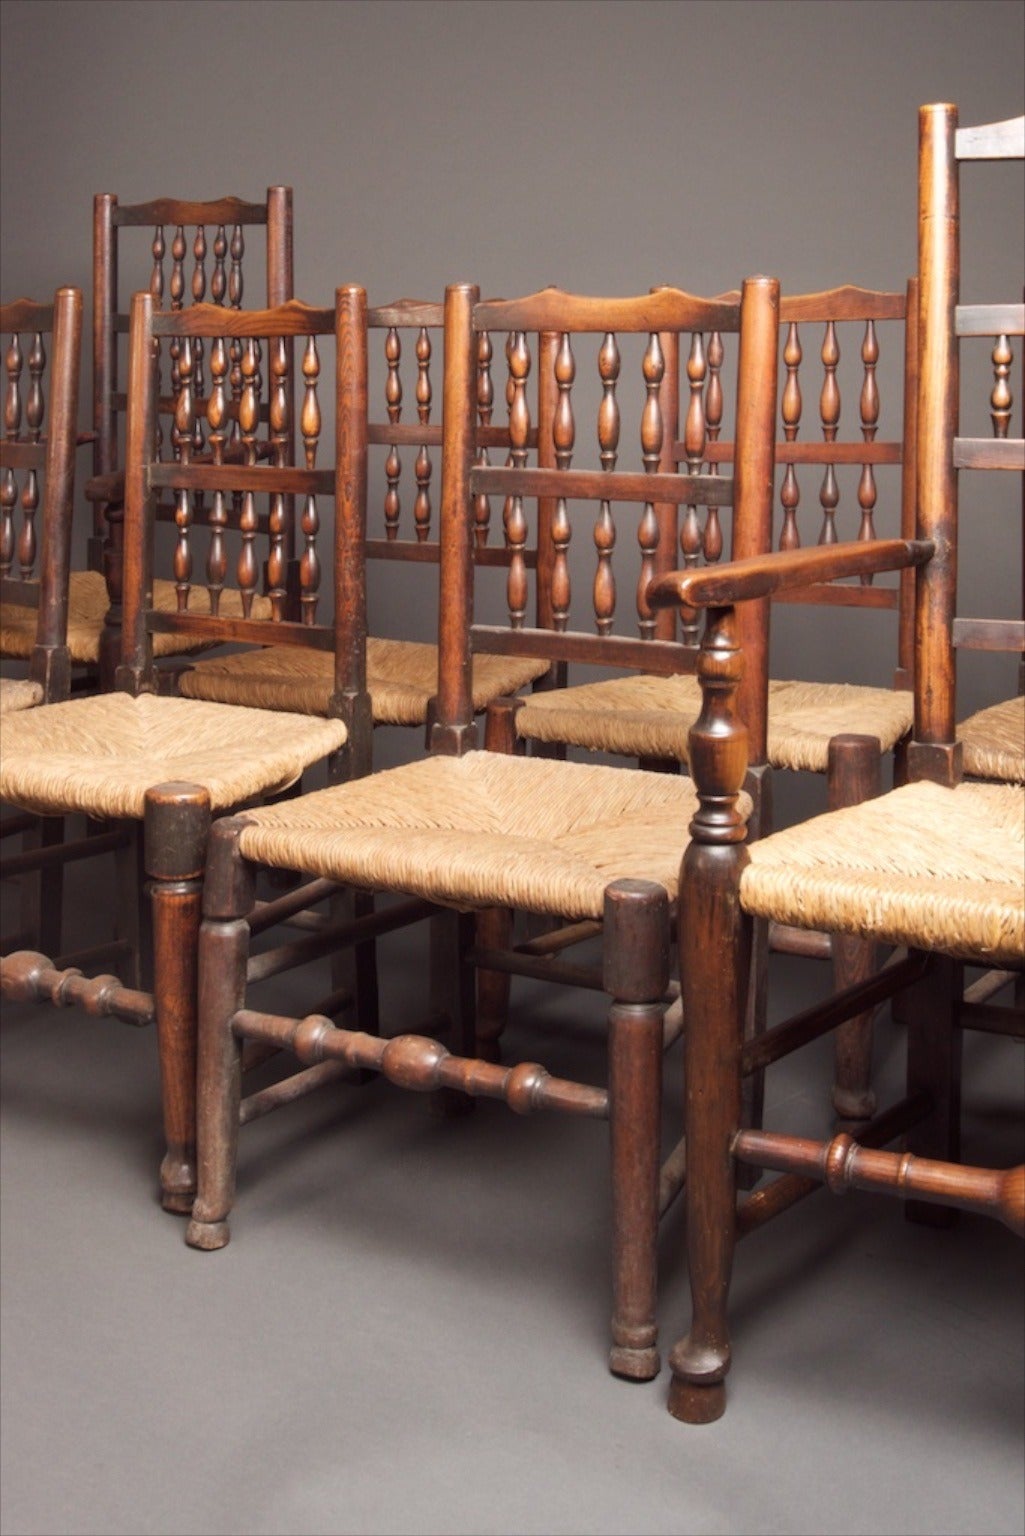 

A mixed set of eight 18th century Lancashire spindle back chairs, includes six sides & two carvers. Beautiful original English country chairs. By a mixed set, this set has probably been assembled over a long period of time & some of the